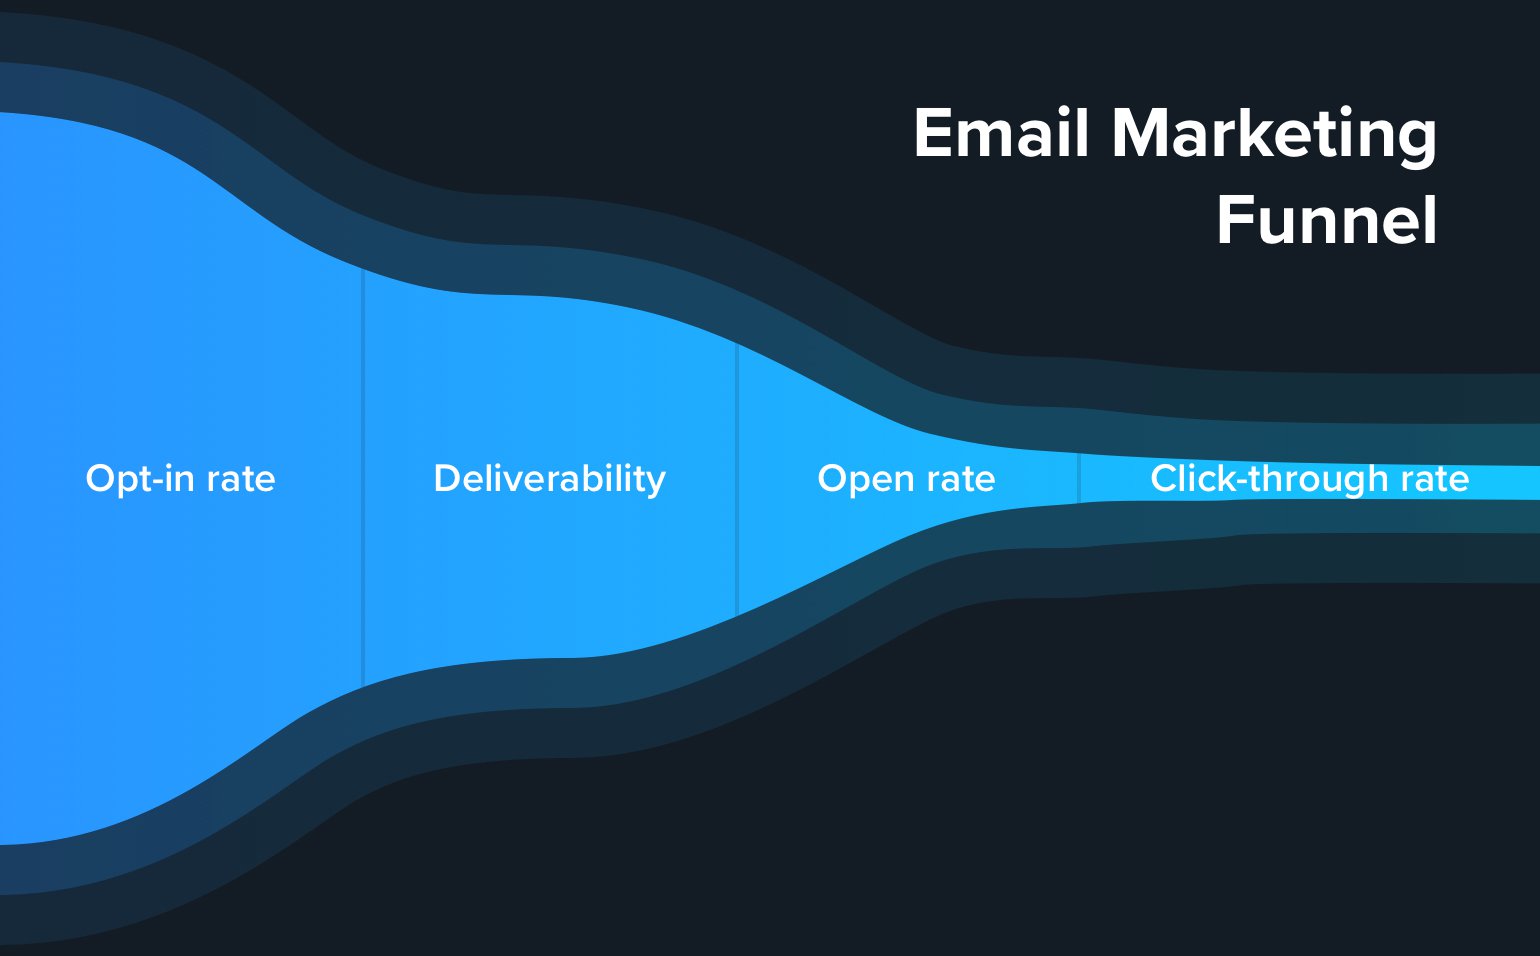 Email marketing funnel graphic